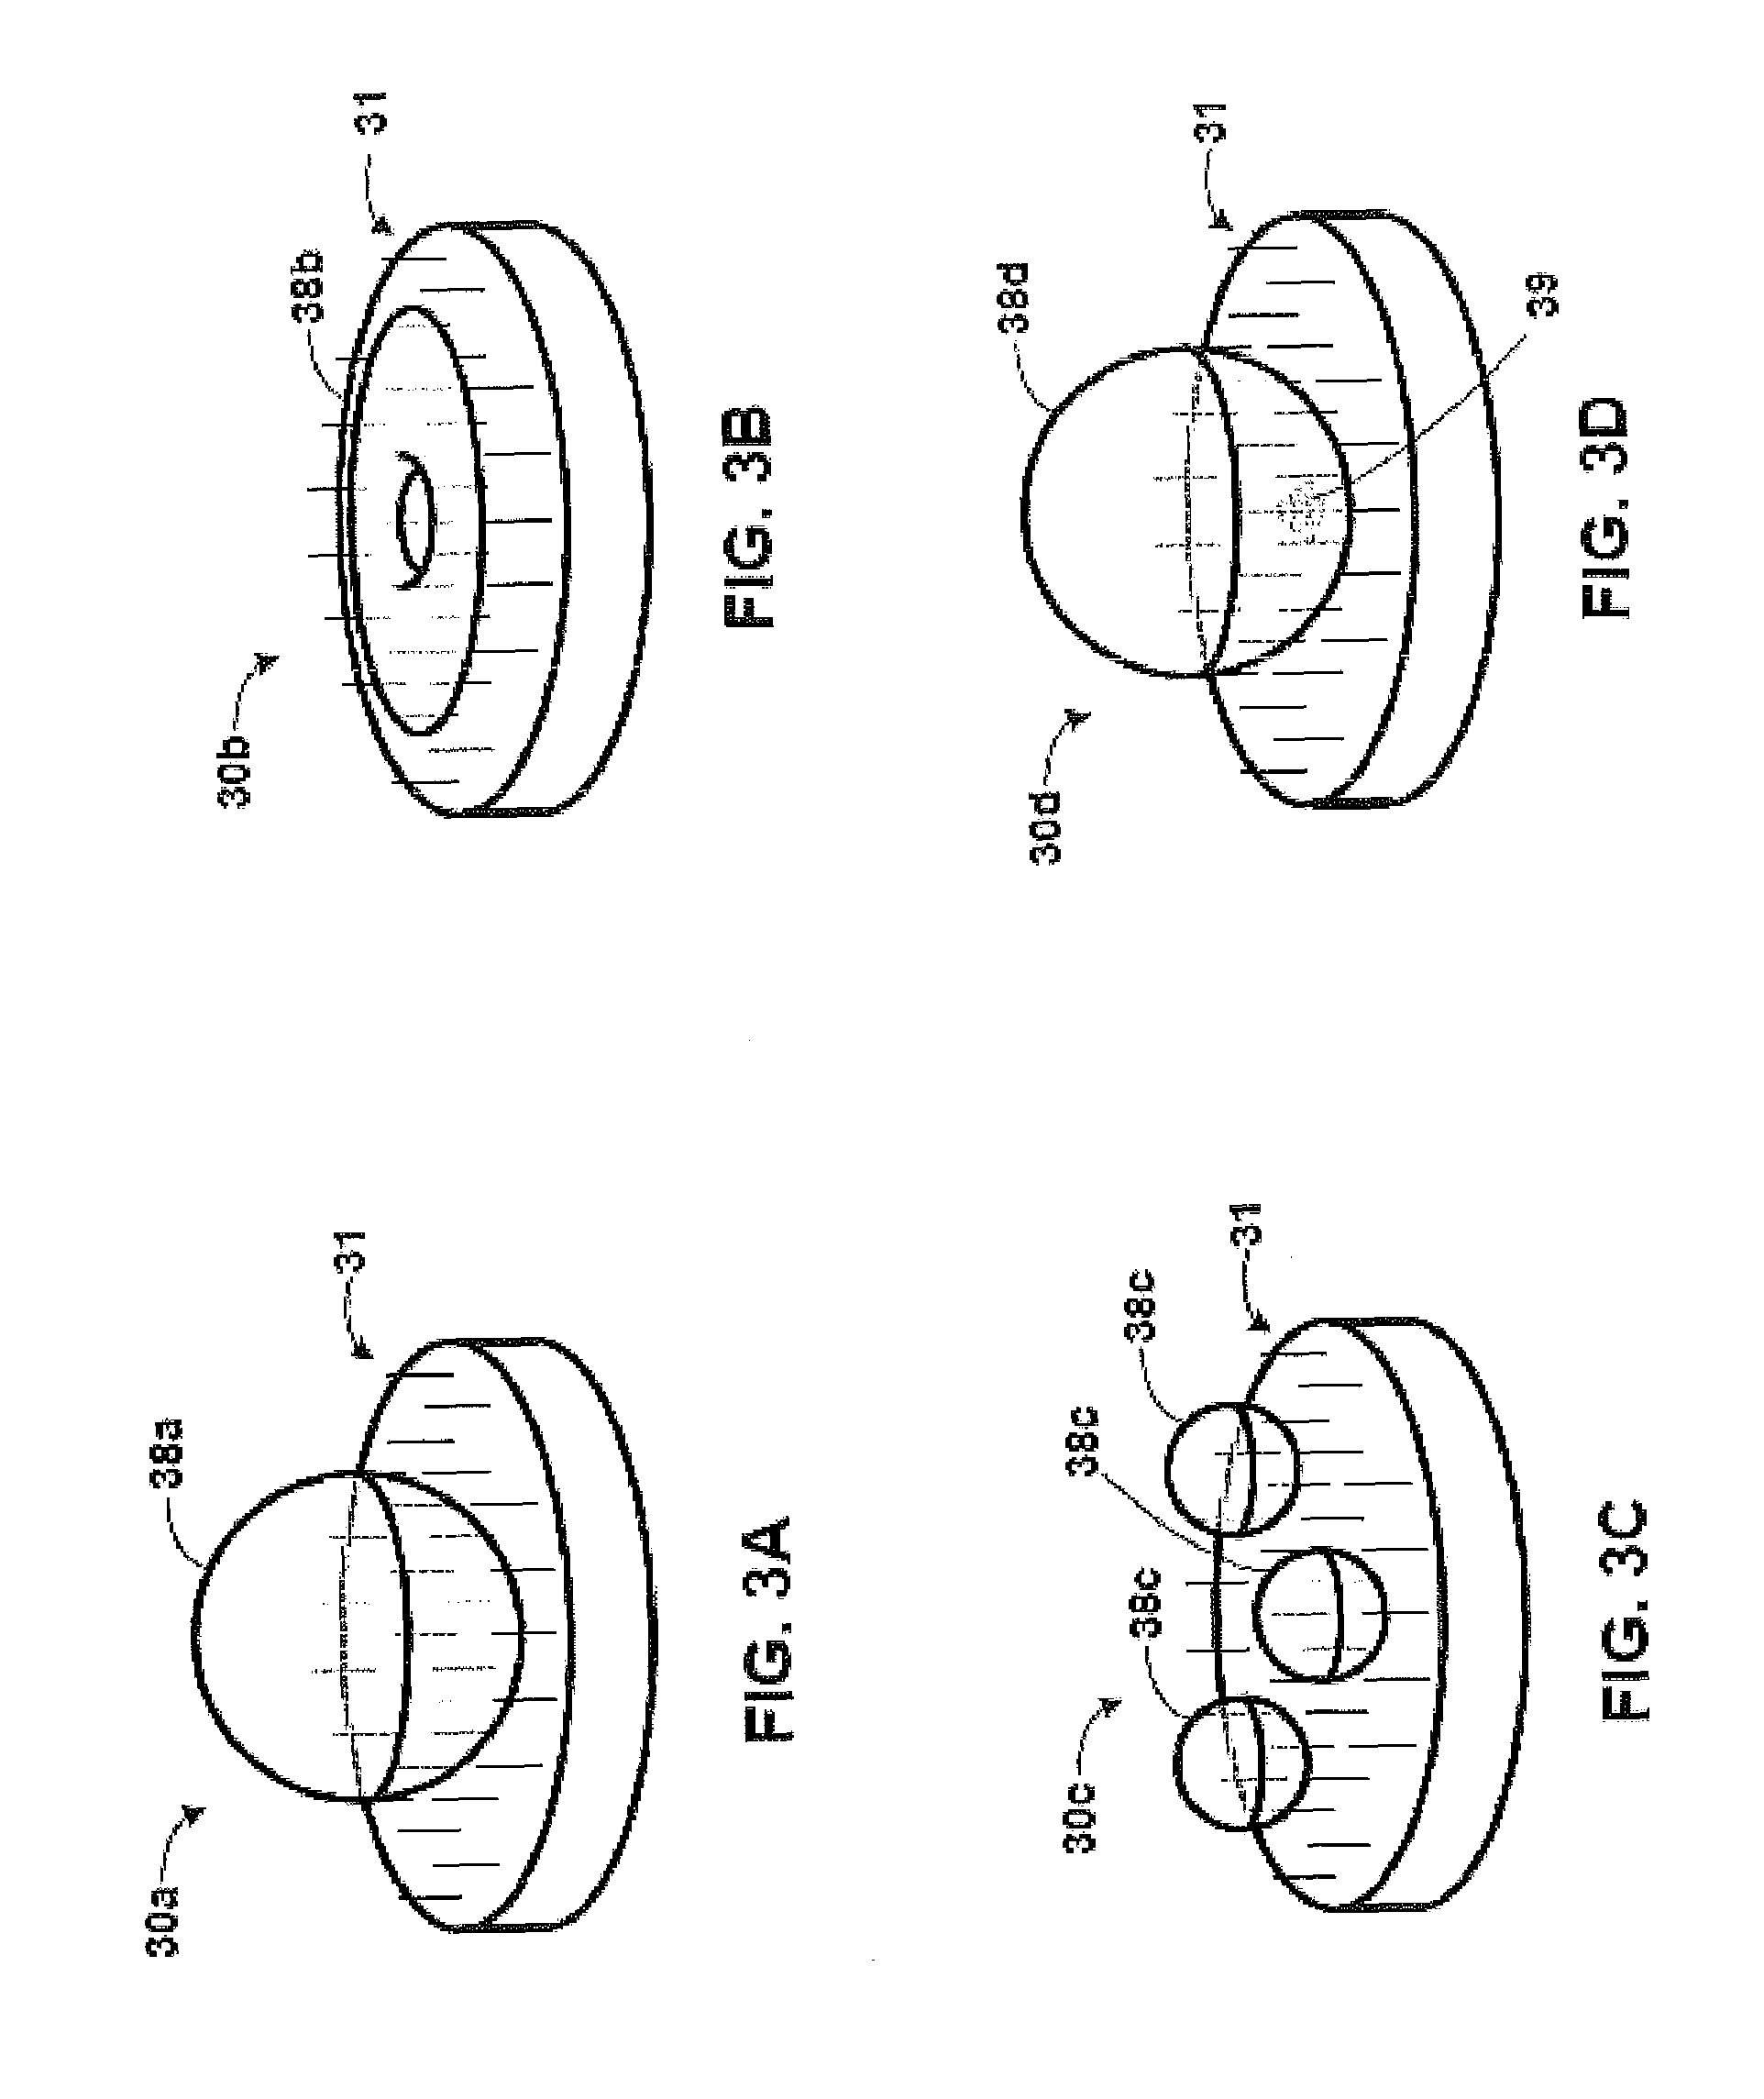 Device with encapsulated gel